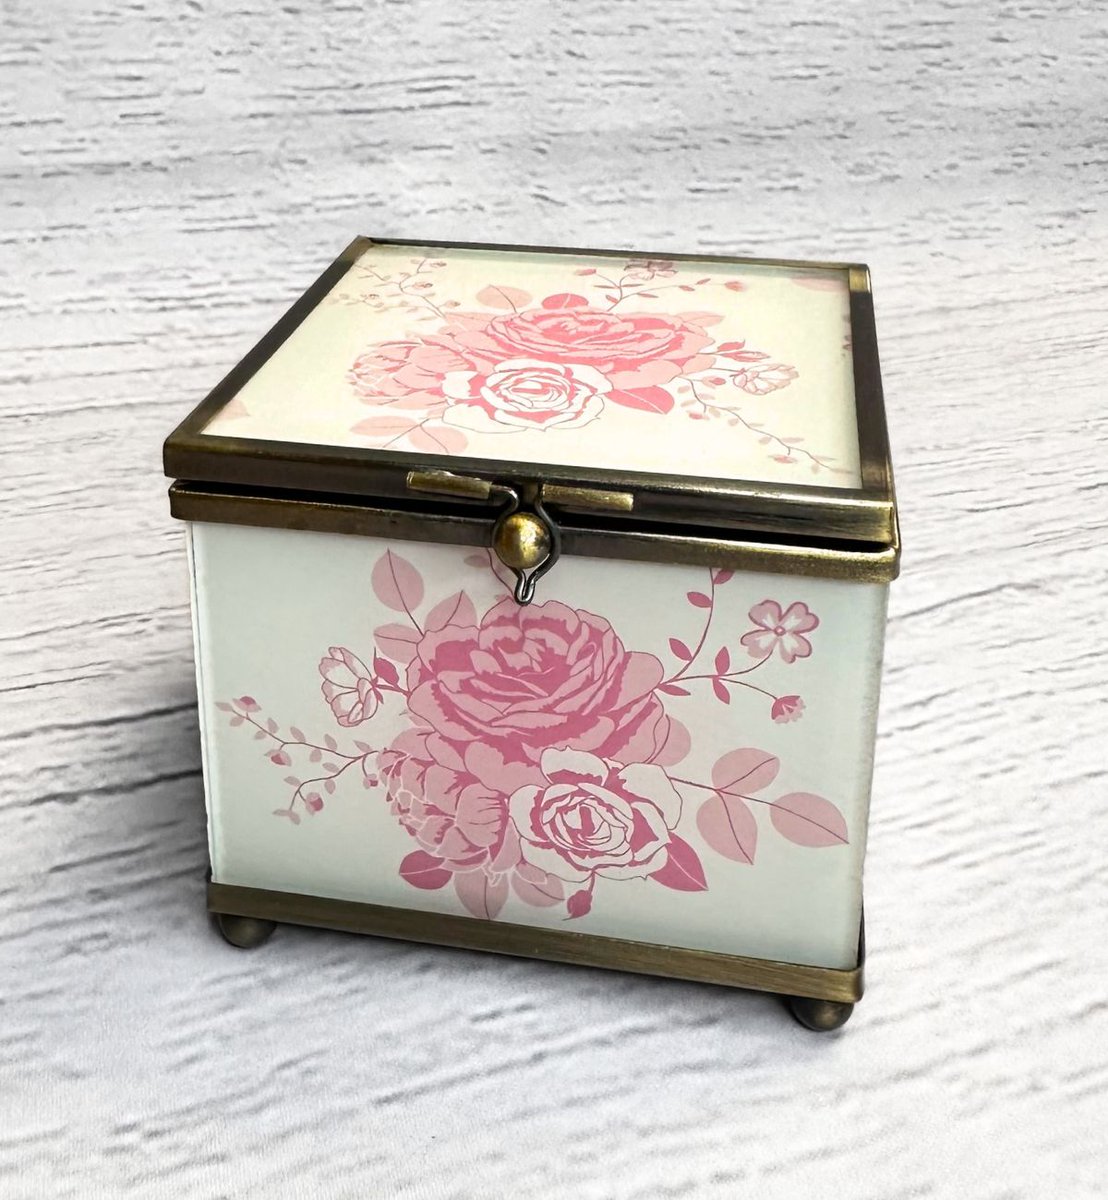 Vintage Trinket Box | Vintage Pink Rose Glass Trinket Box
 myvintage.uk/product-page/v… #vintage #retro #collector #collectibles #Trinketbox #Uniquegifts #giftsforher #giftsformom #giftideas #props #jewelrybox #jewellerybox